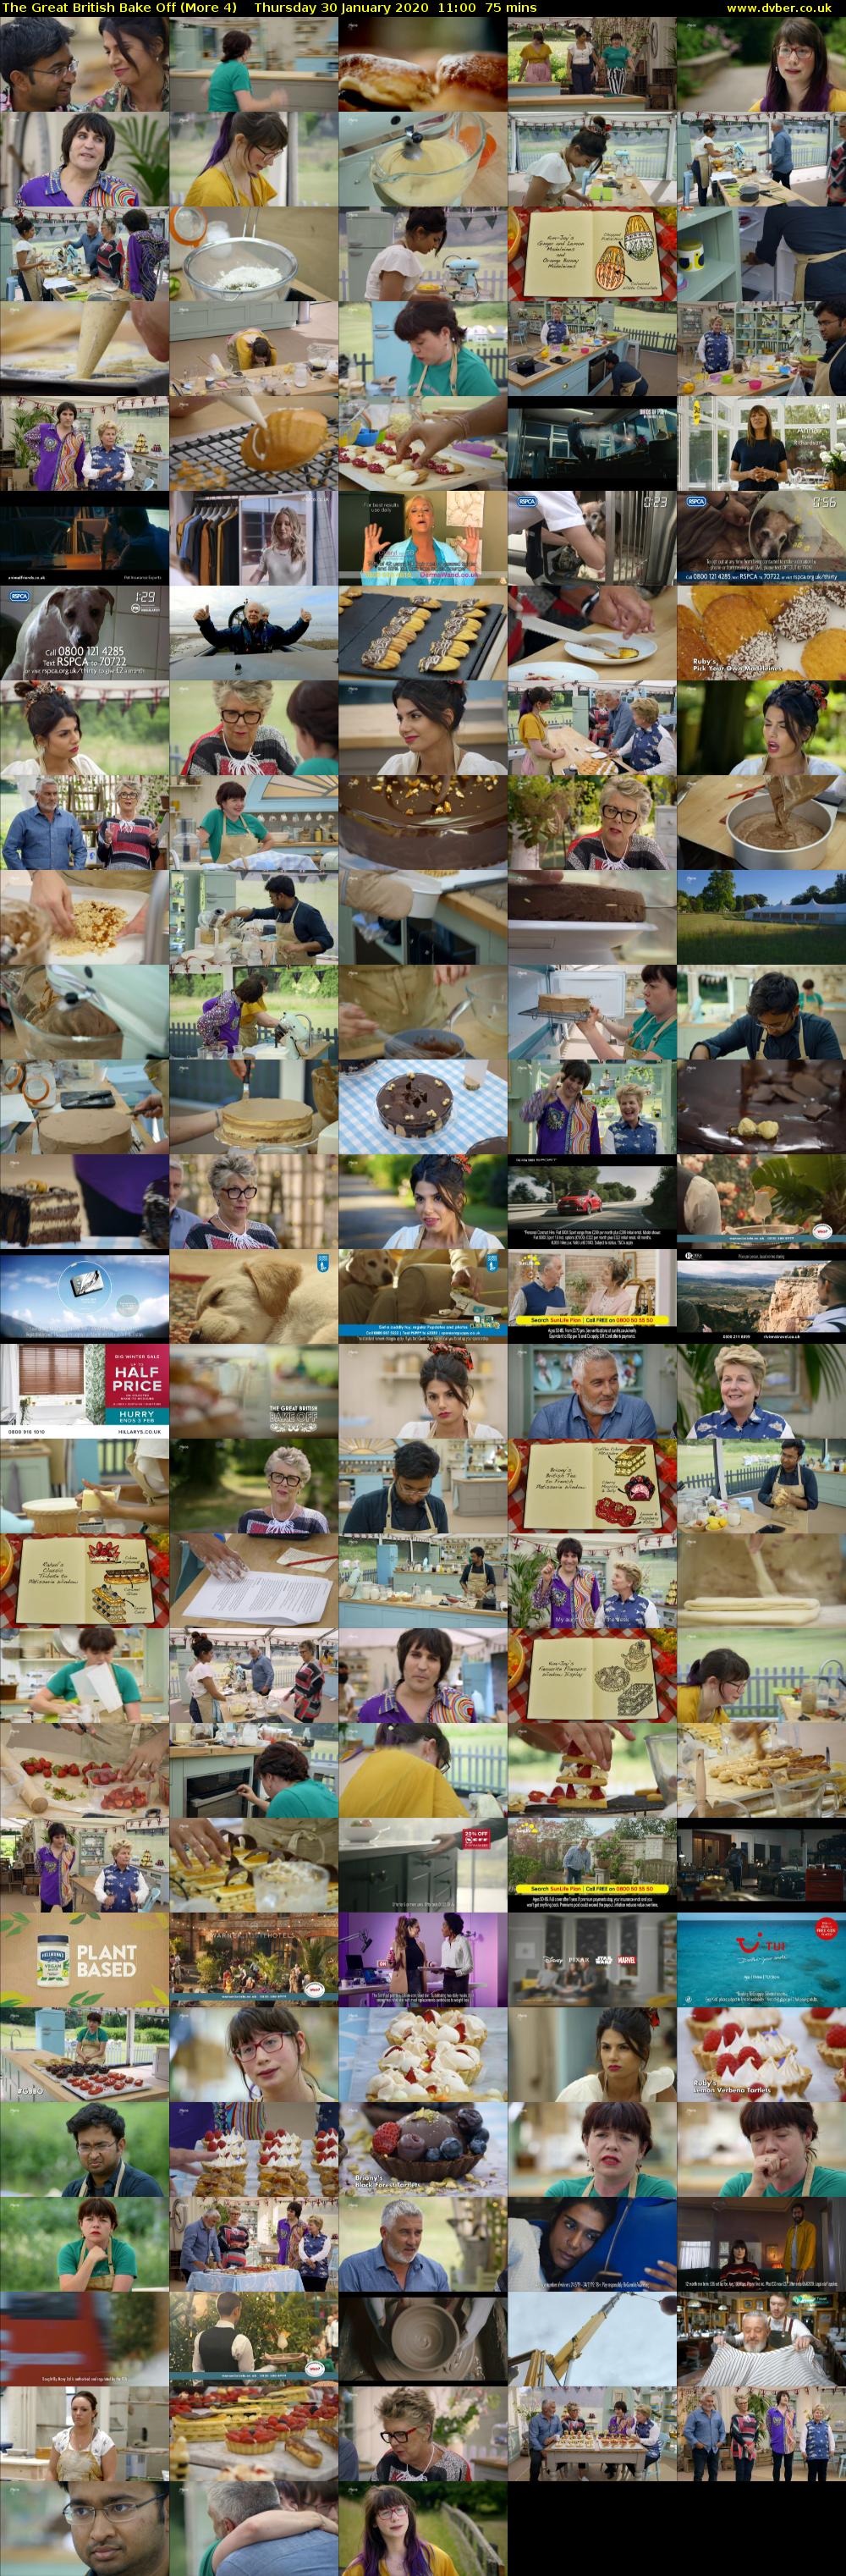 The Great British Bake Off (More 4) Thursday 30 January 2020 11:00 - 12:15